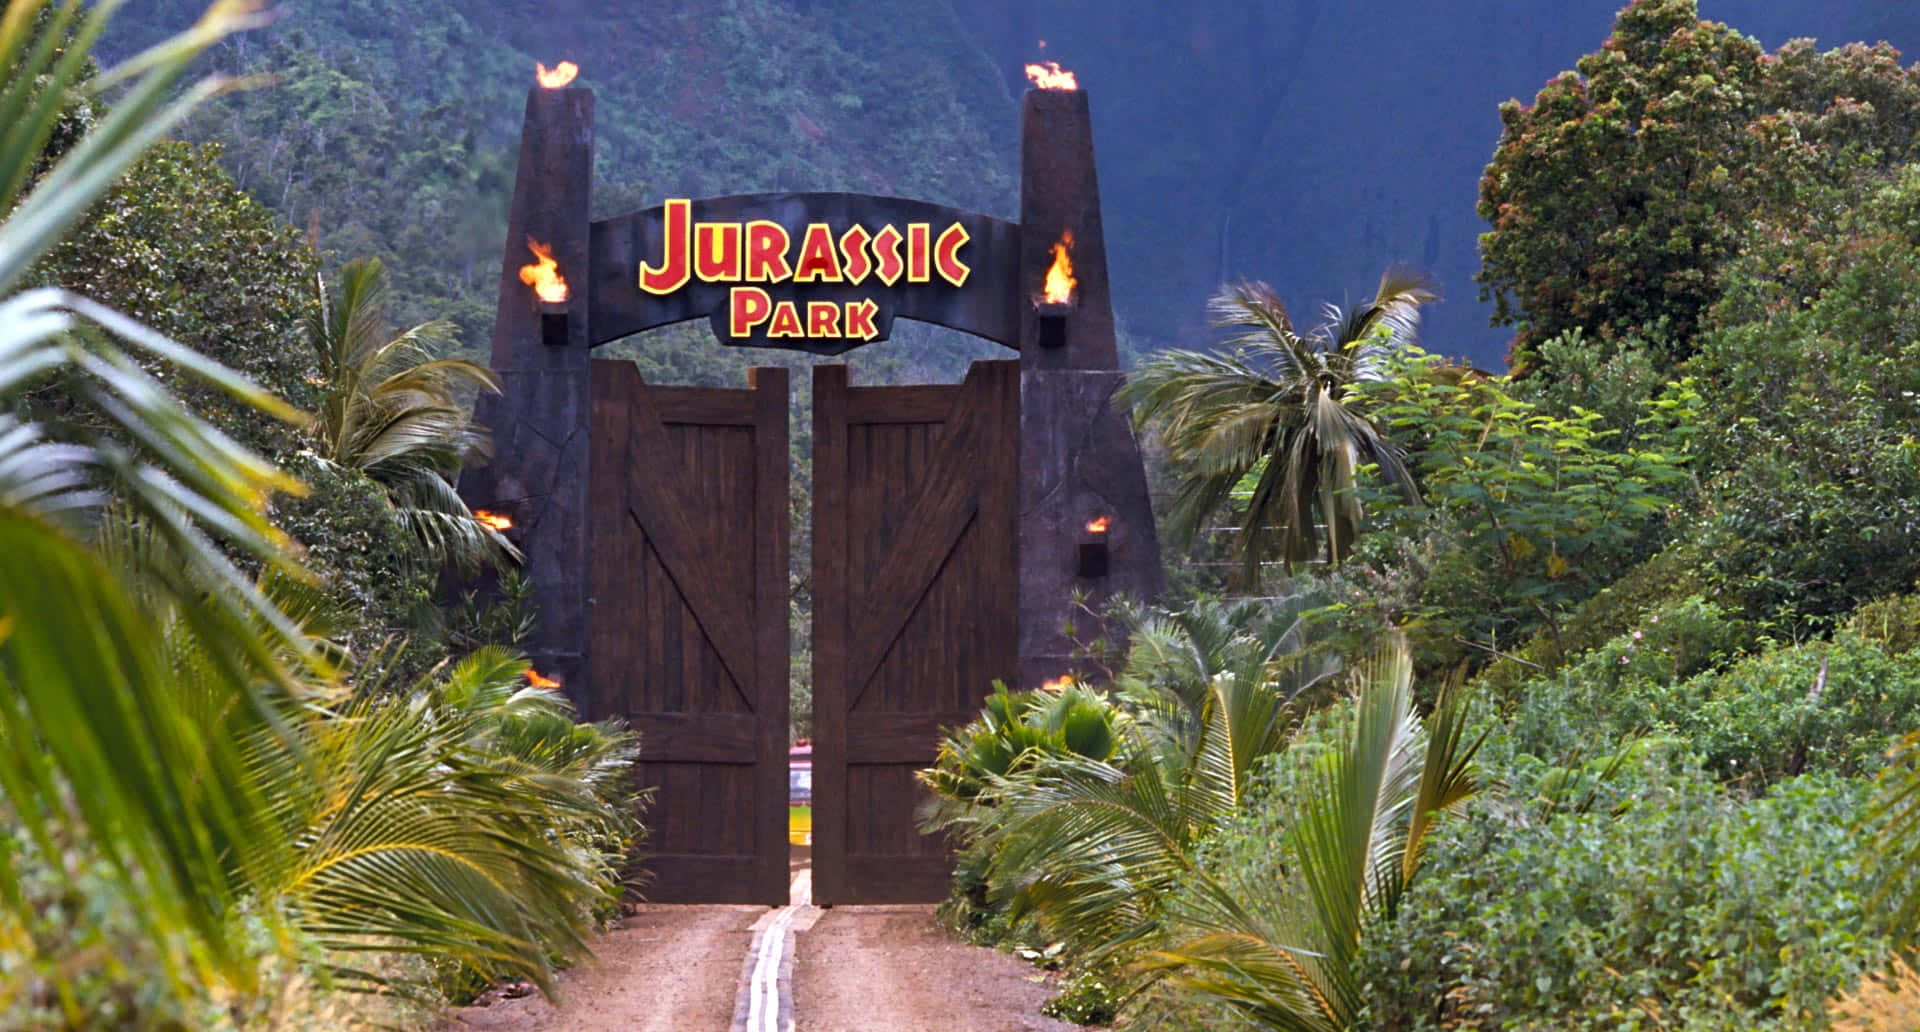 "Explore Jurassic Park from the Comfort of Your Zoom Call"